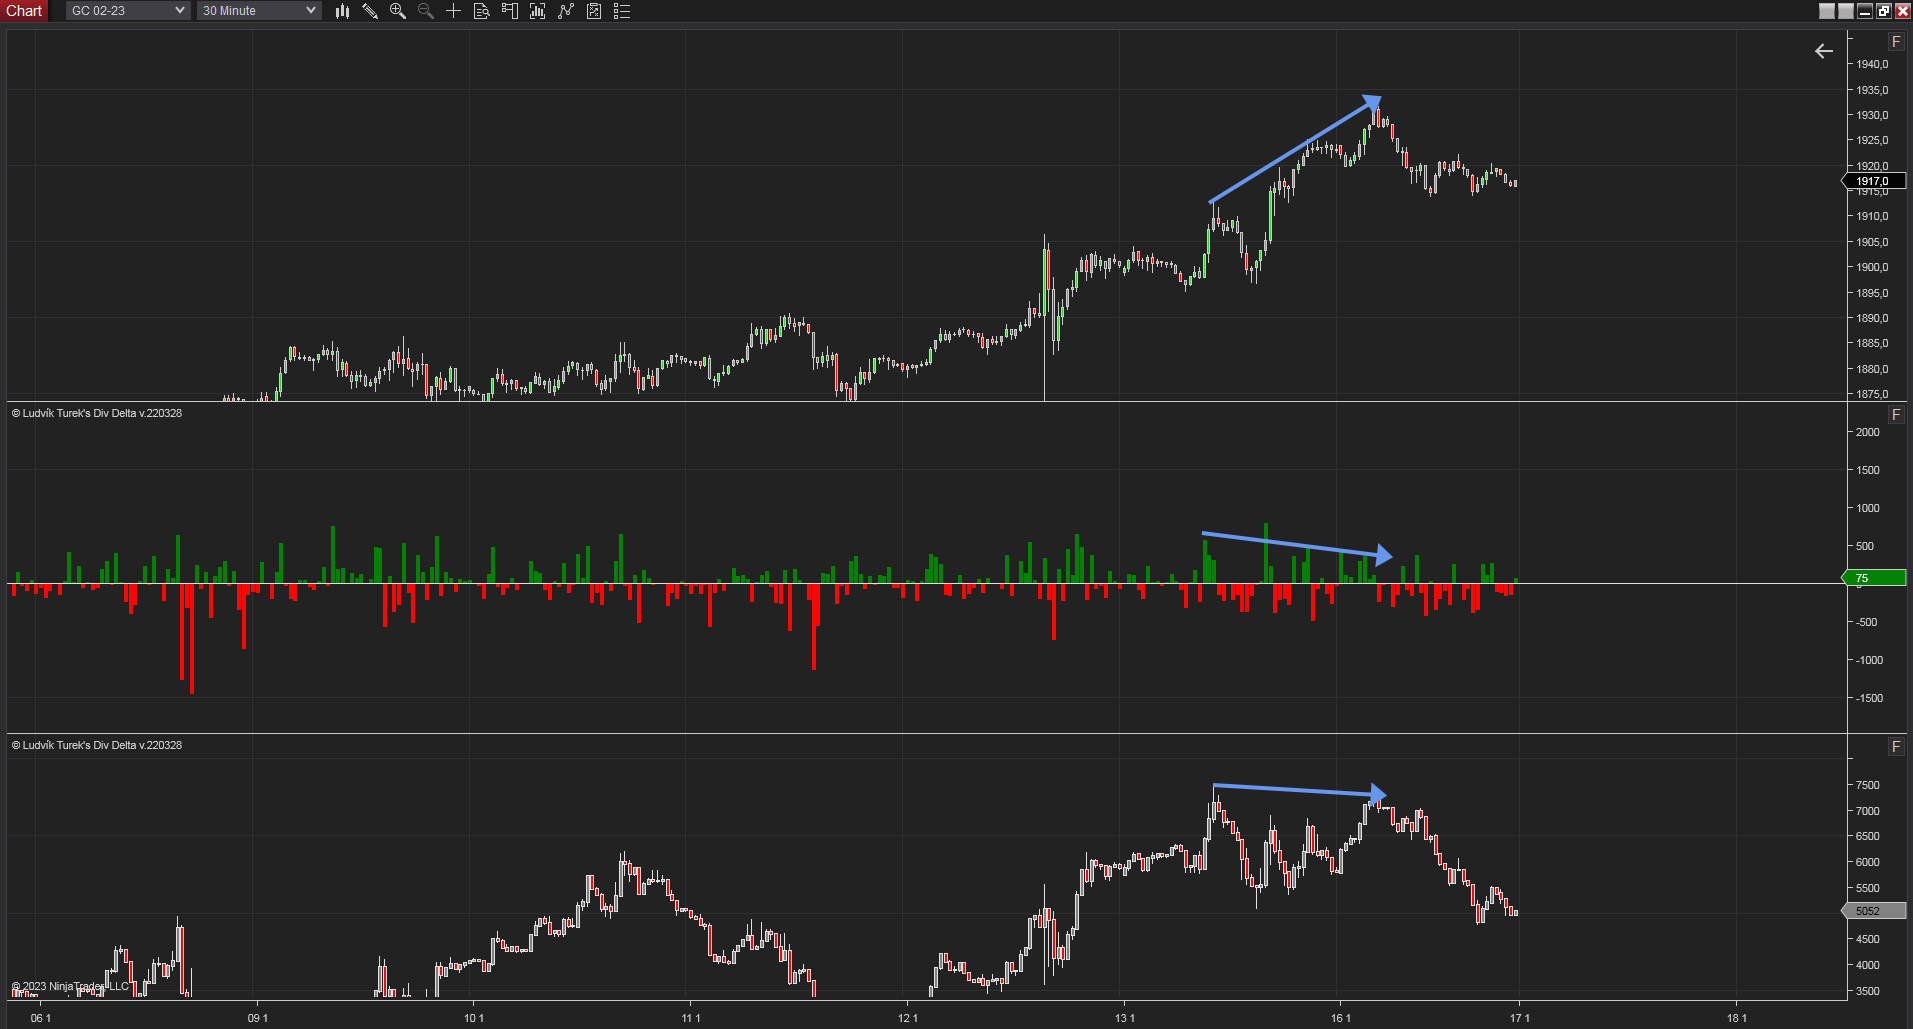 30 minutes chart of GC (Gold Futures), Divergence delta. Source: Author's analysis